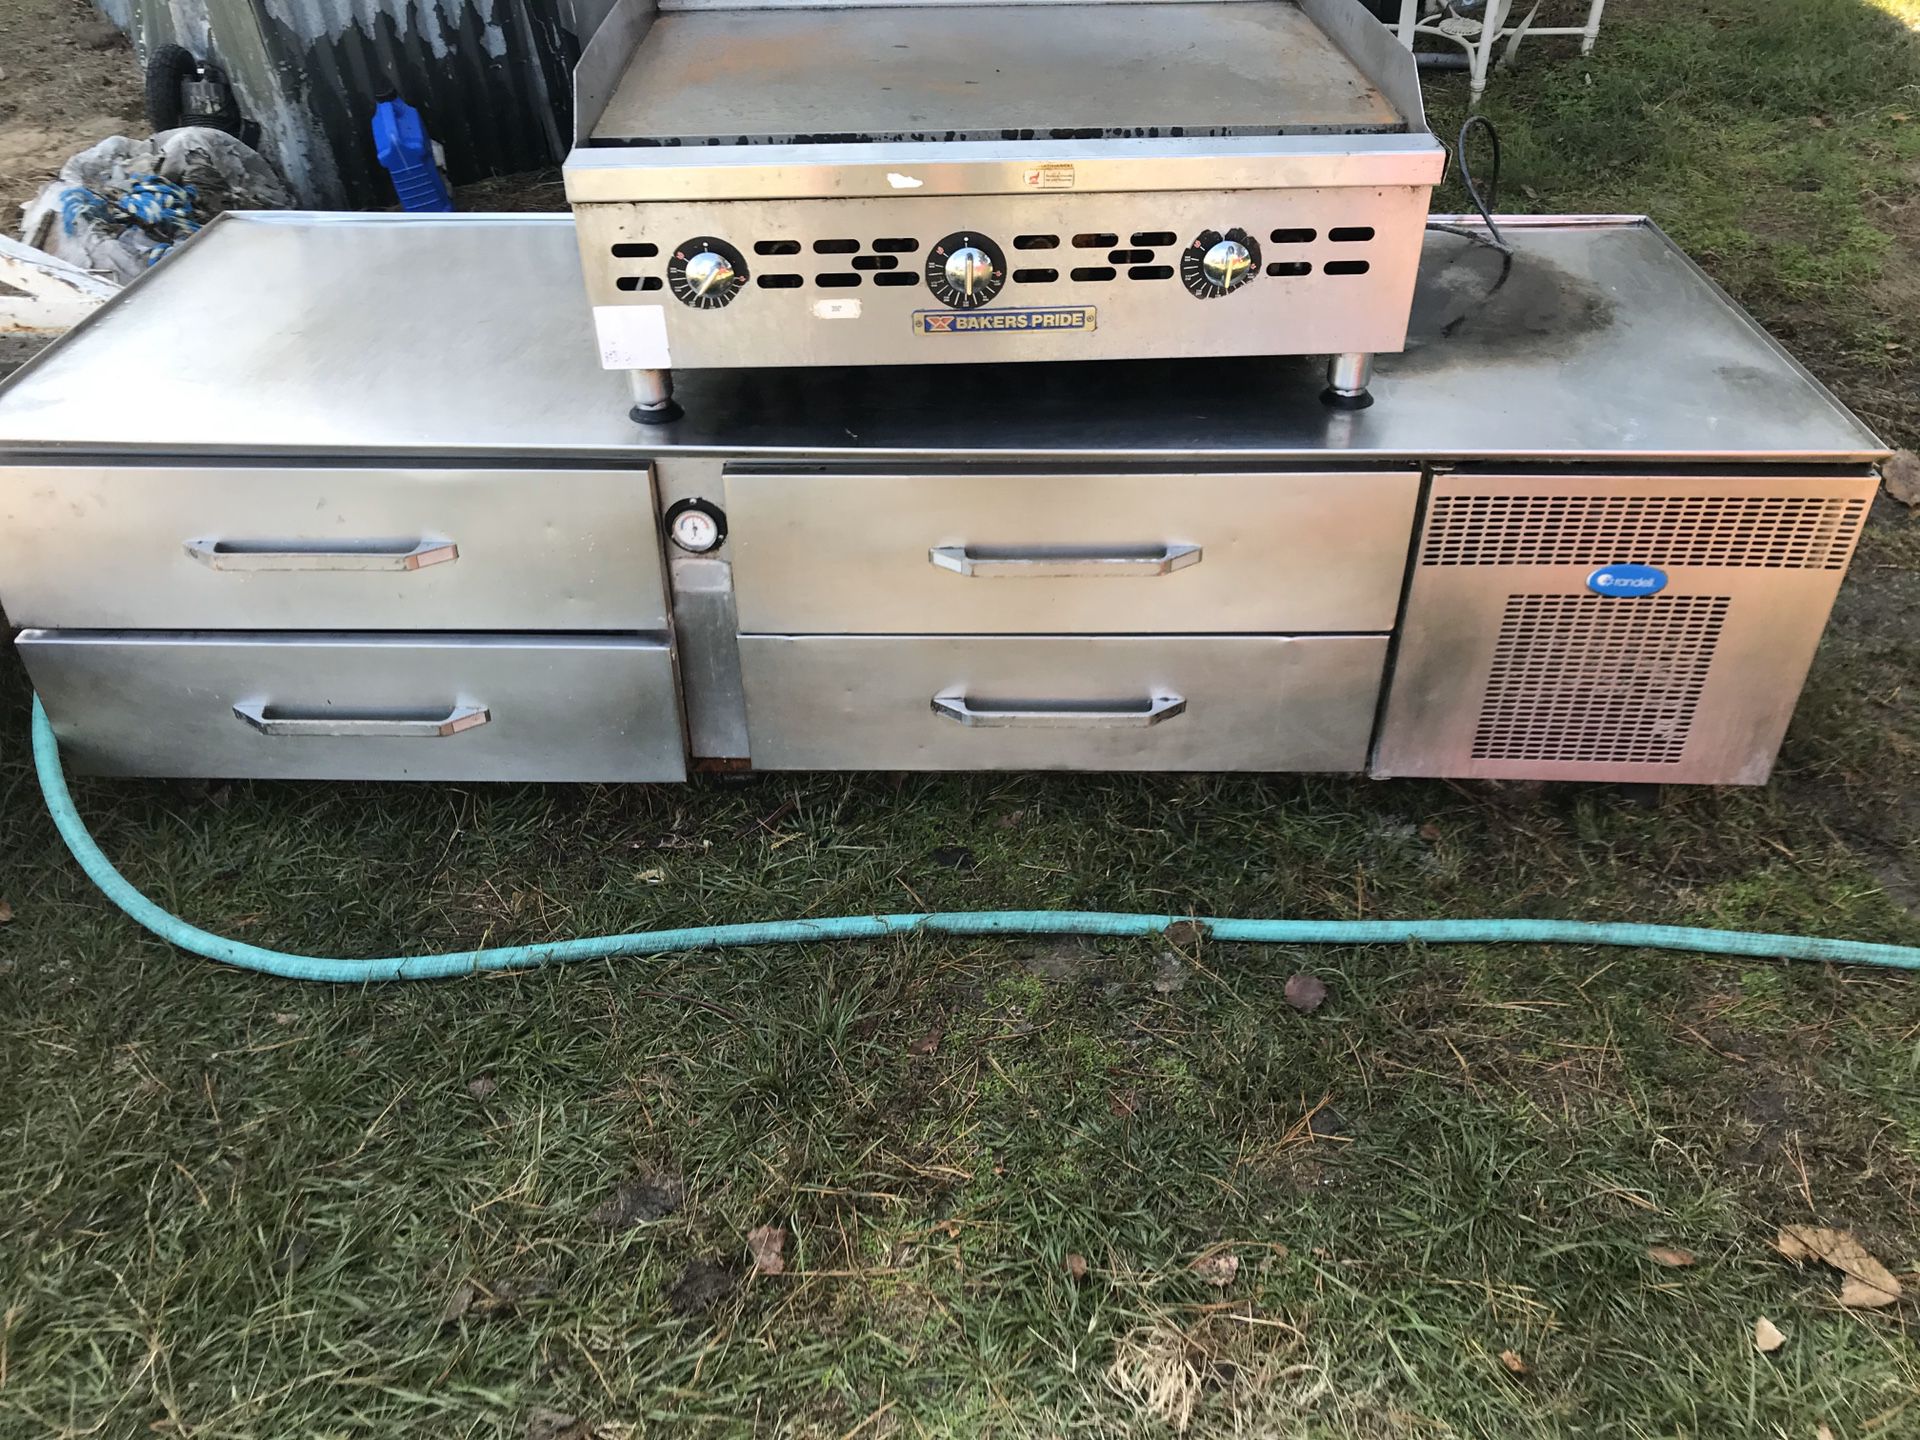 Commercial 4 drawer cooler and flattop grill